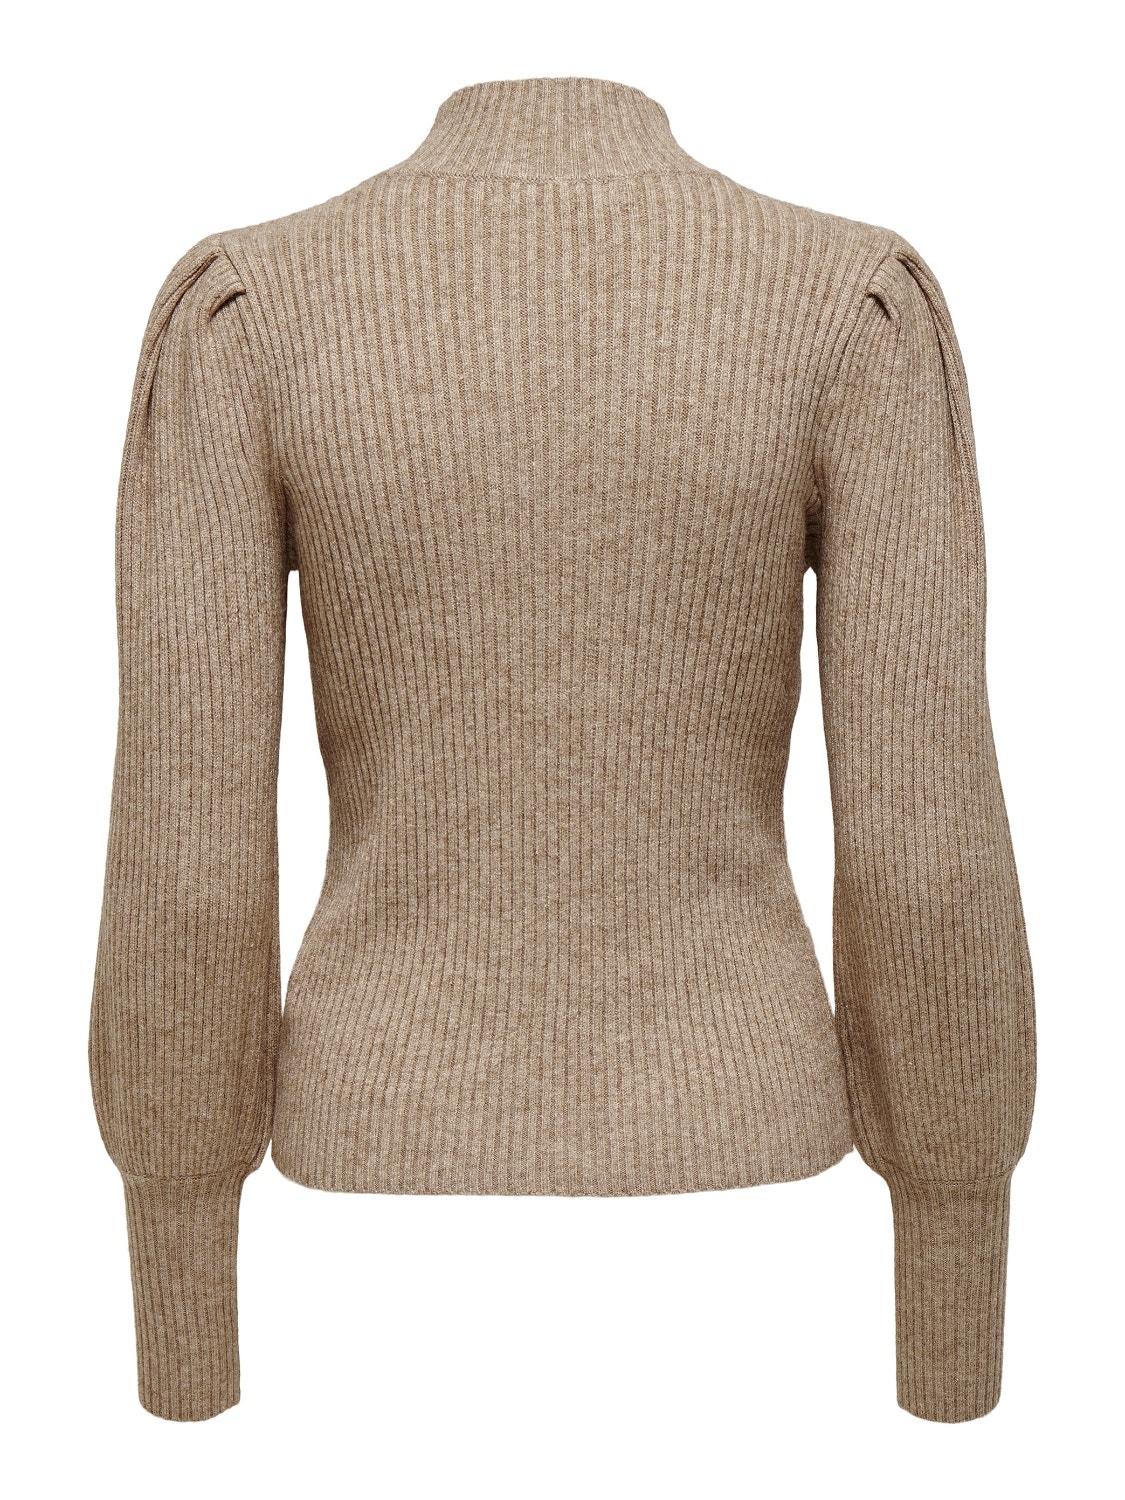 ONLY High neck Knitted Pullover -Toasted Coconut - 15232494